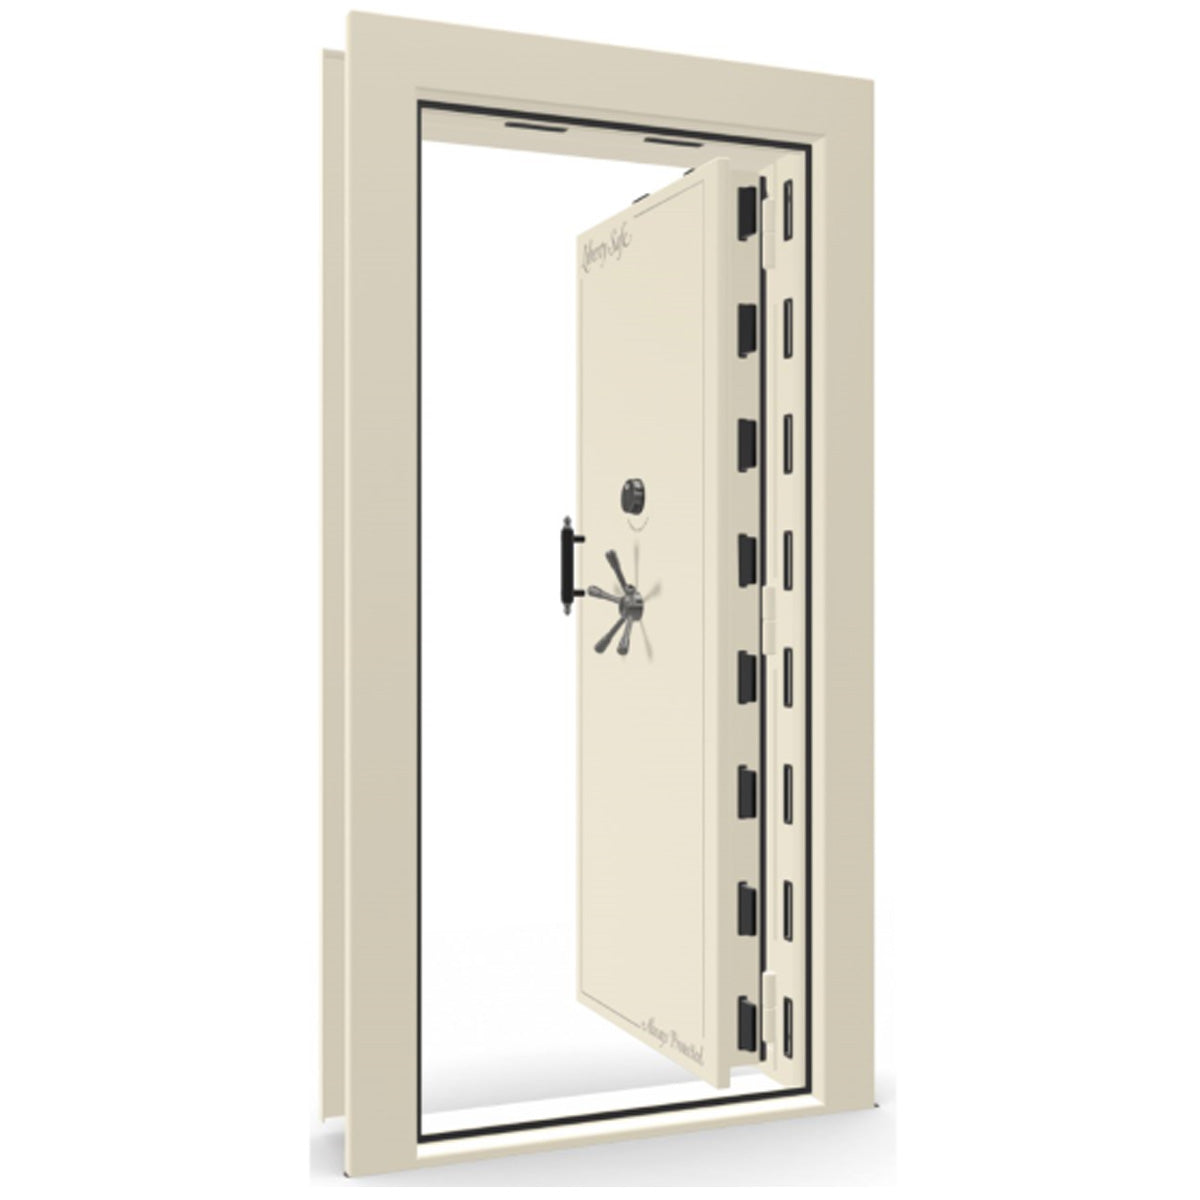 The Beast Vault Door in White Gloss with Black Chrome Electronic Lock, Right Inswing, door open.